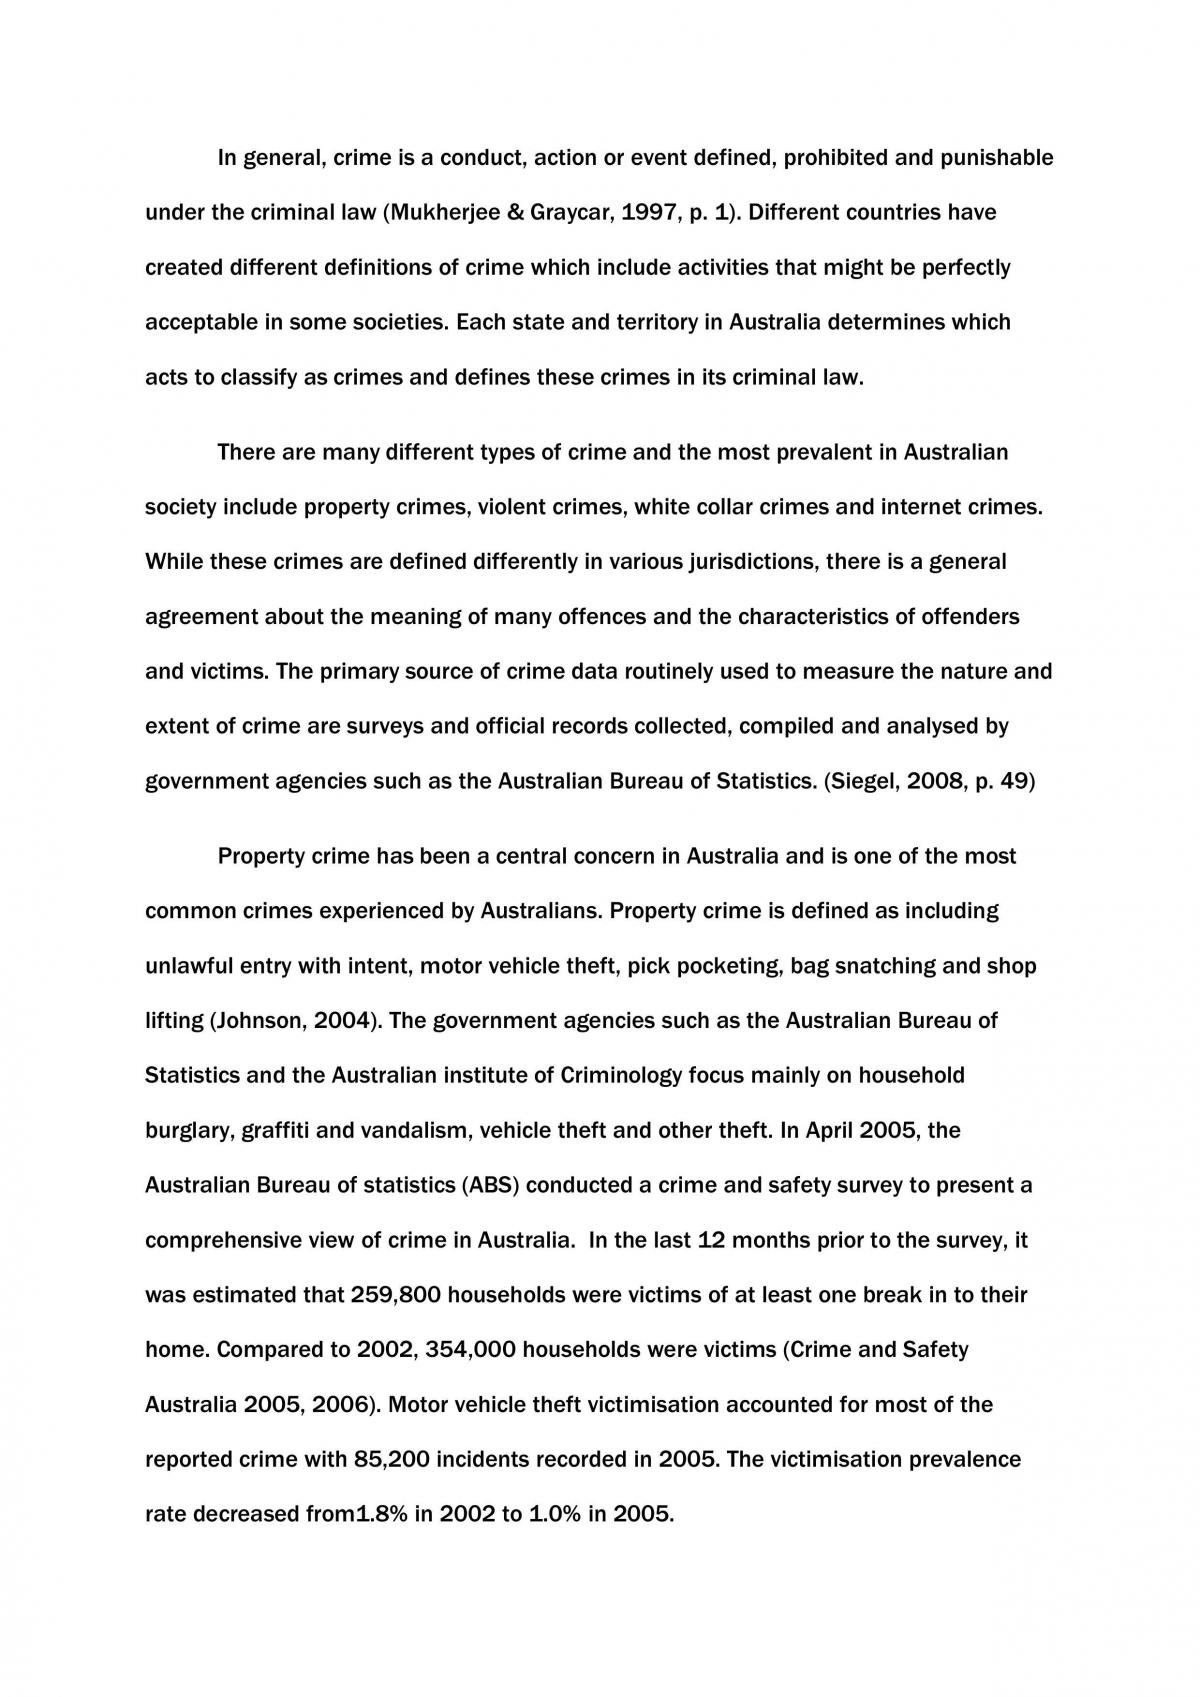 introduction to crime essay